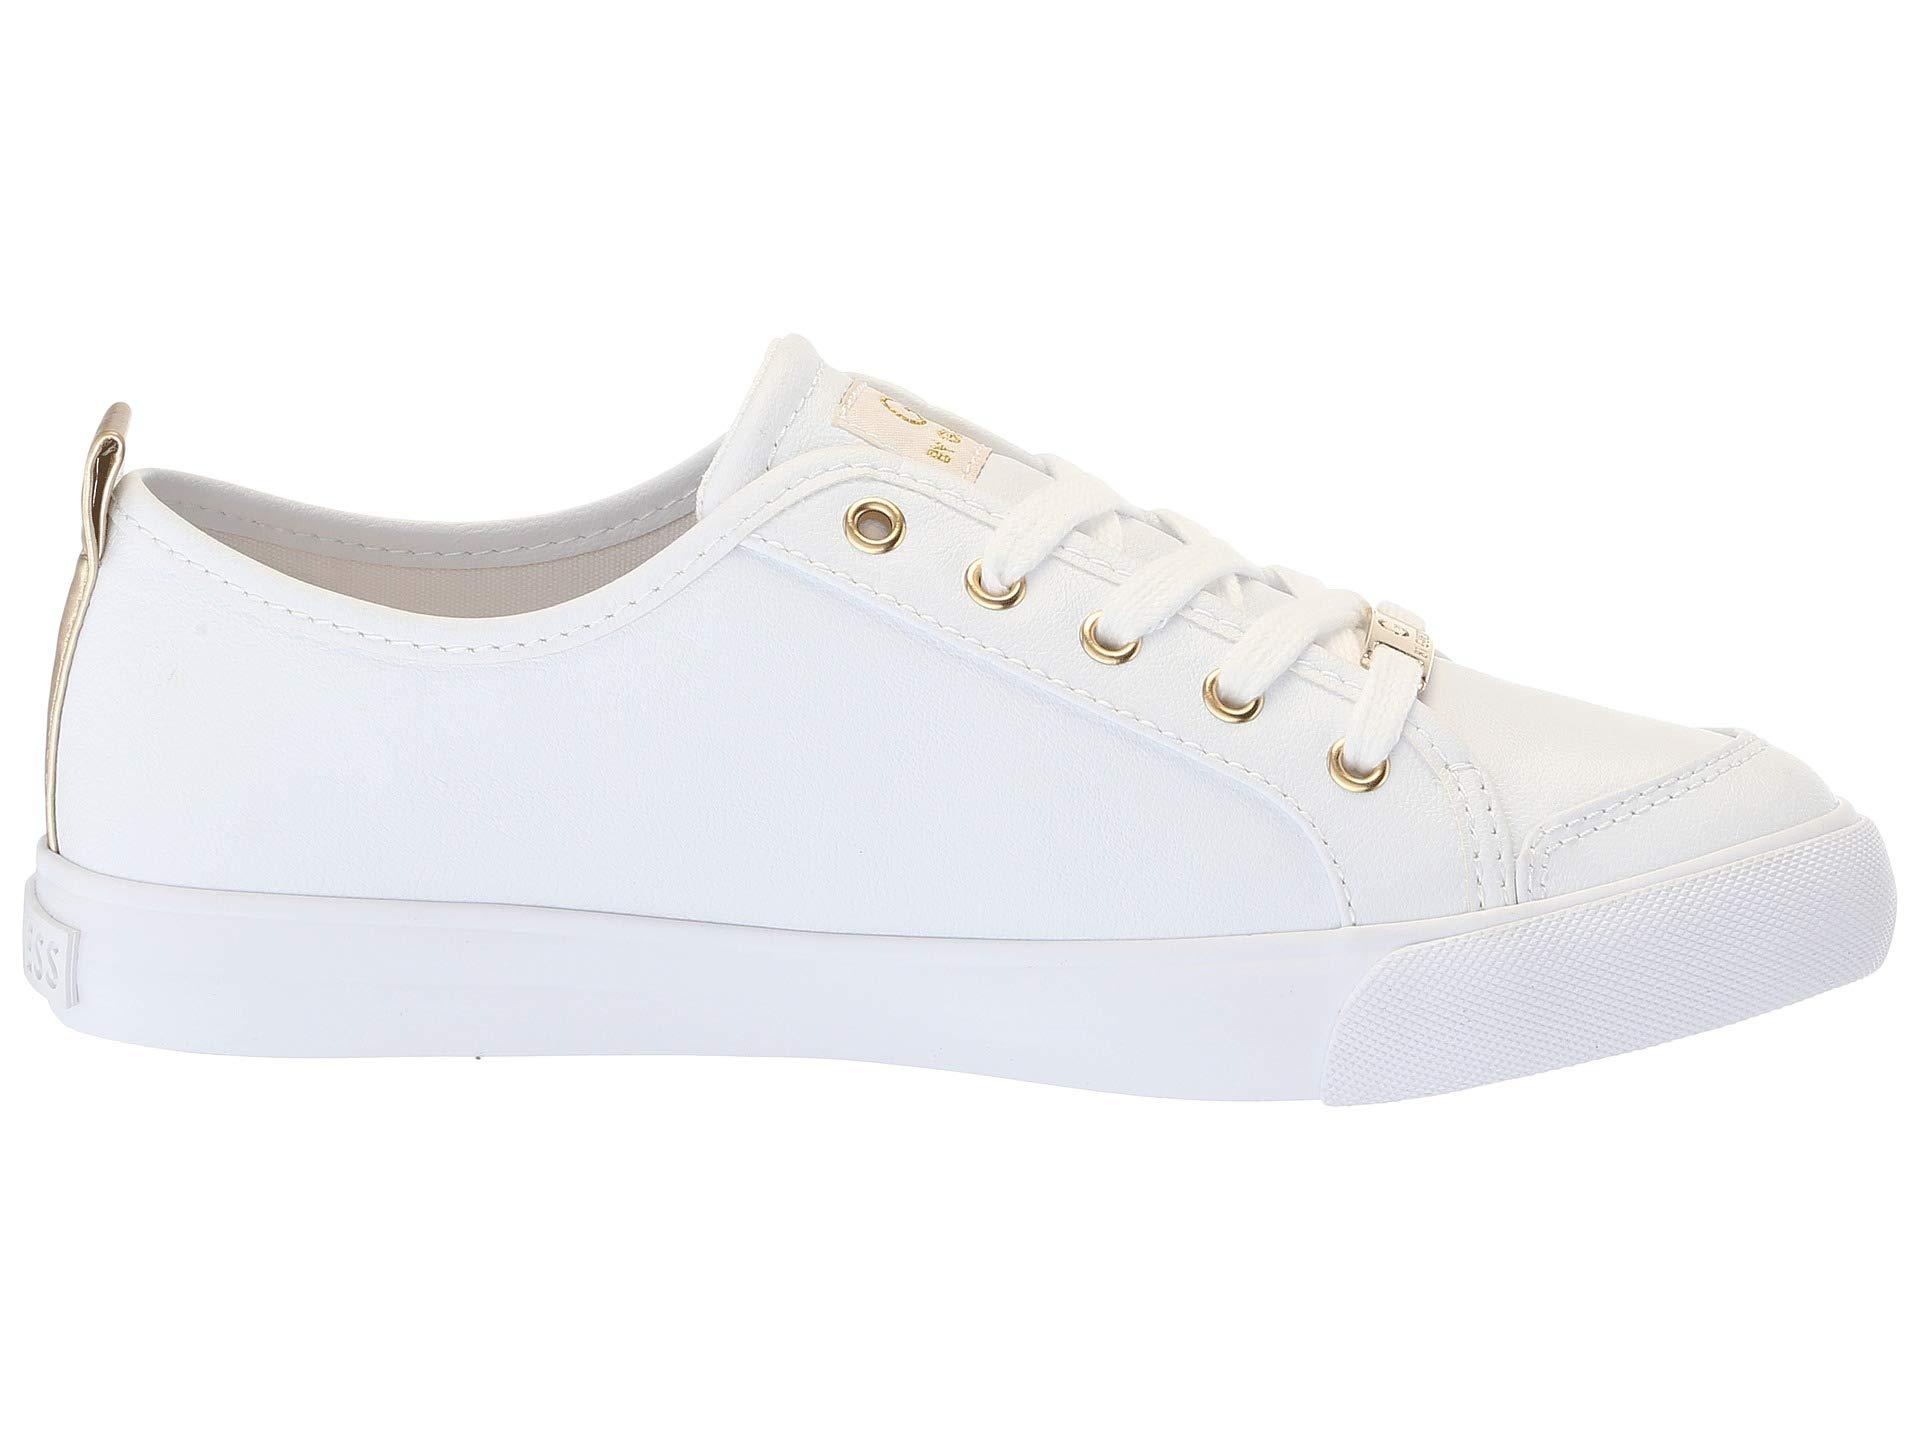 G by Guess Banx2 (white/gold/gold) Women's Shoes - Lyst